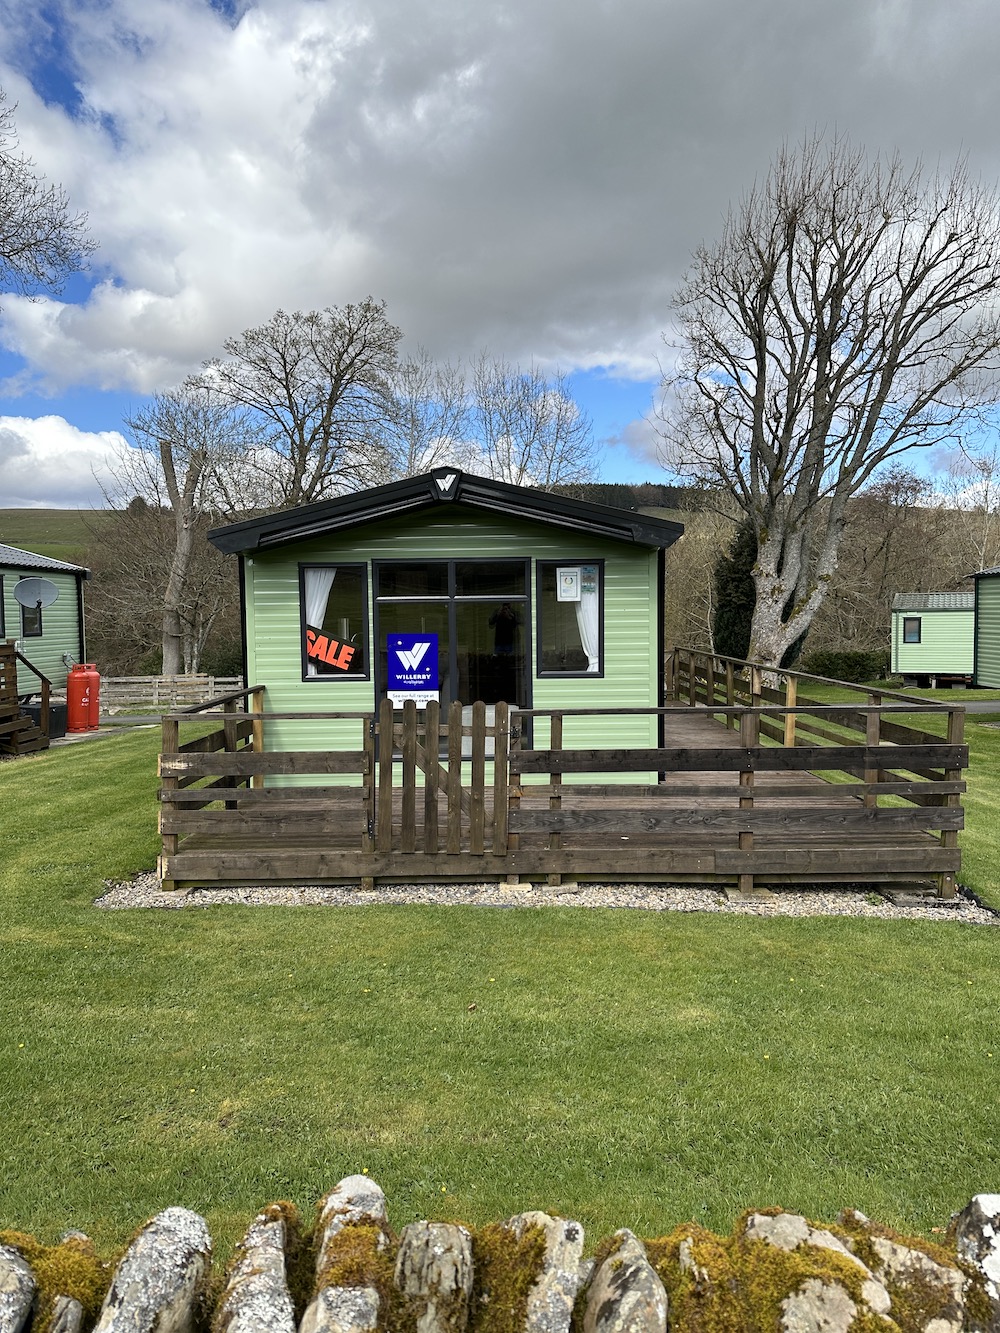 The 2021 Willerby Manor New Static Caravan